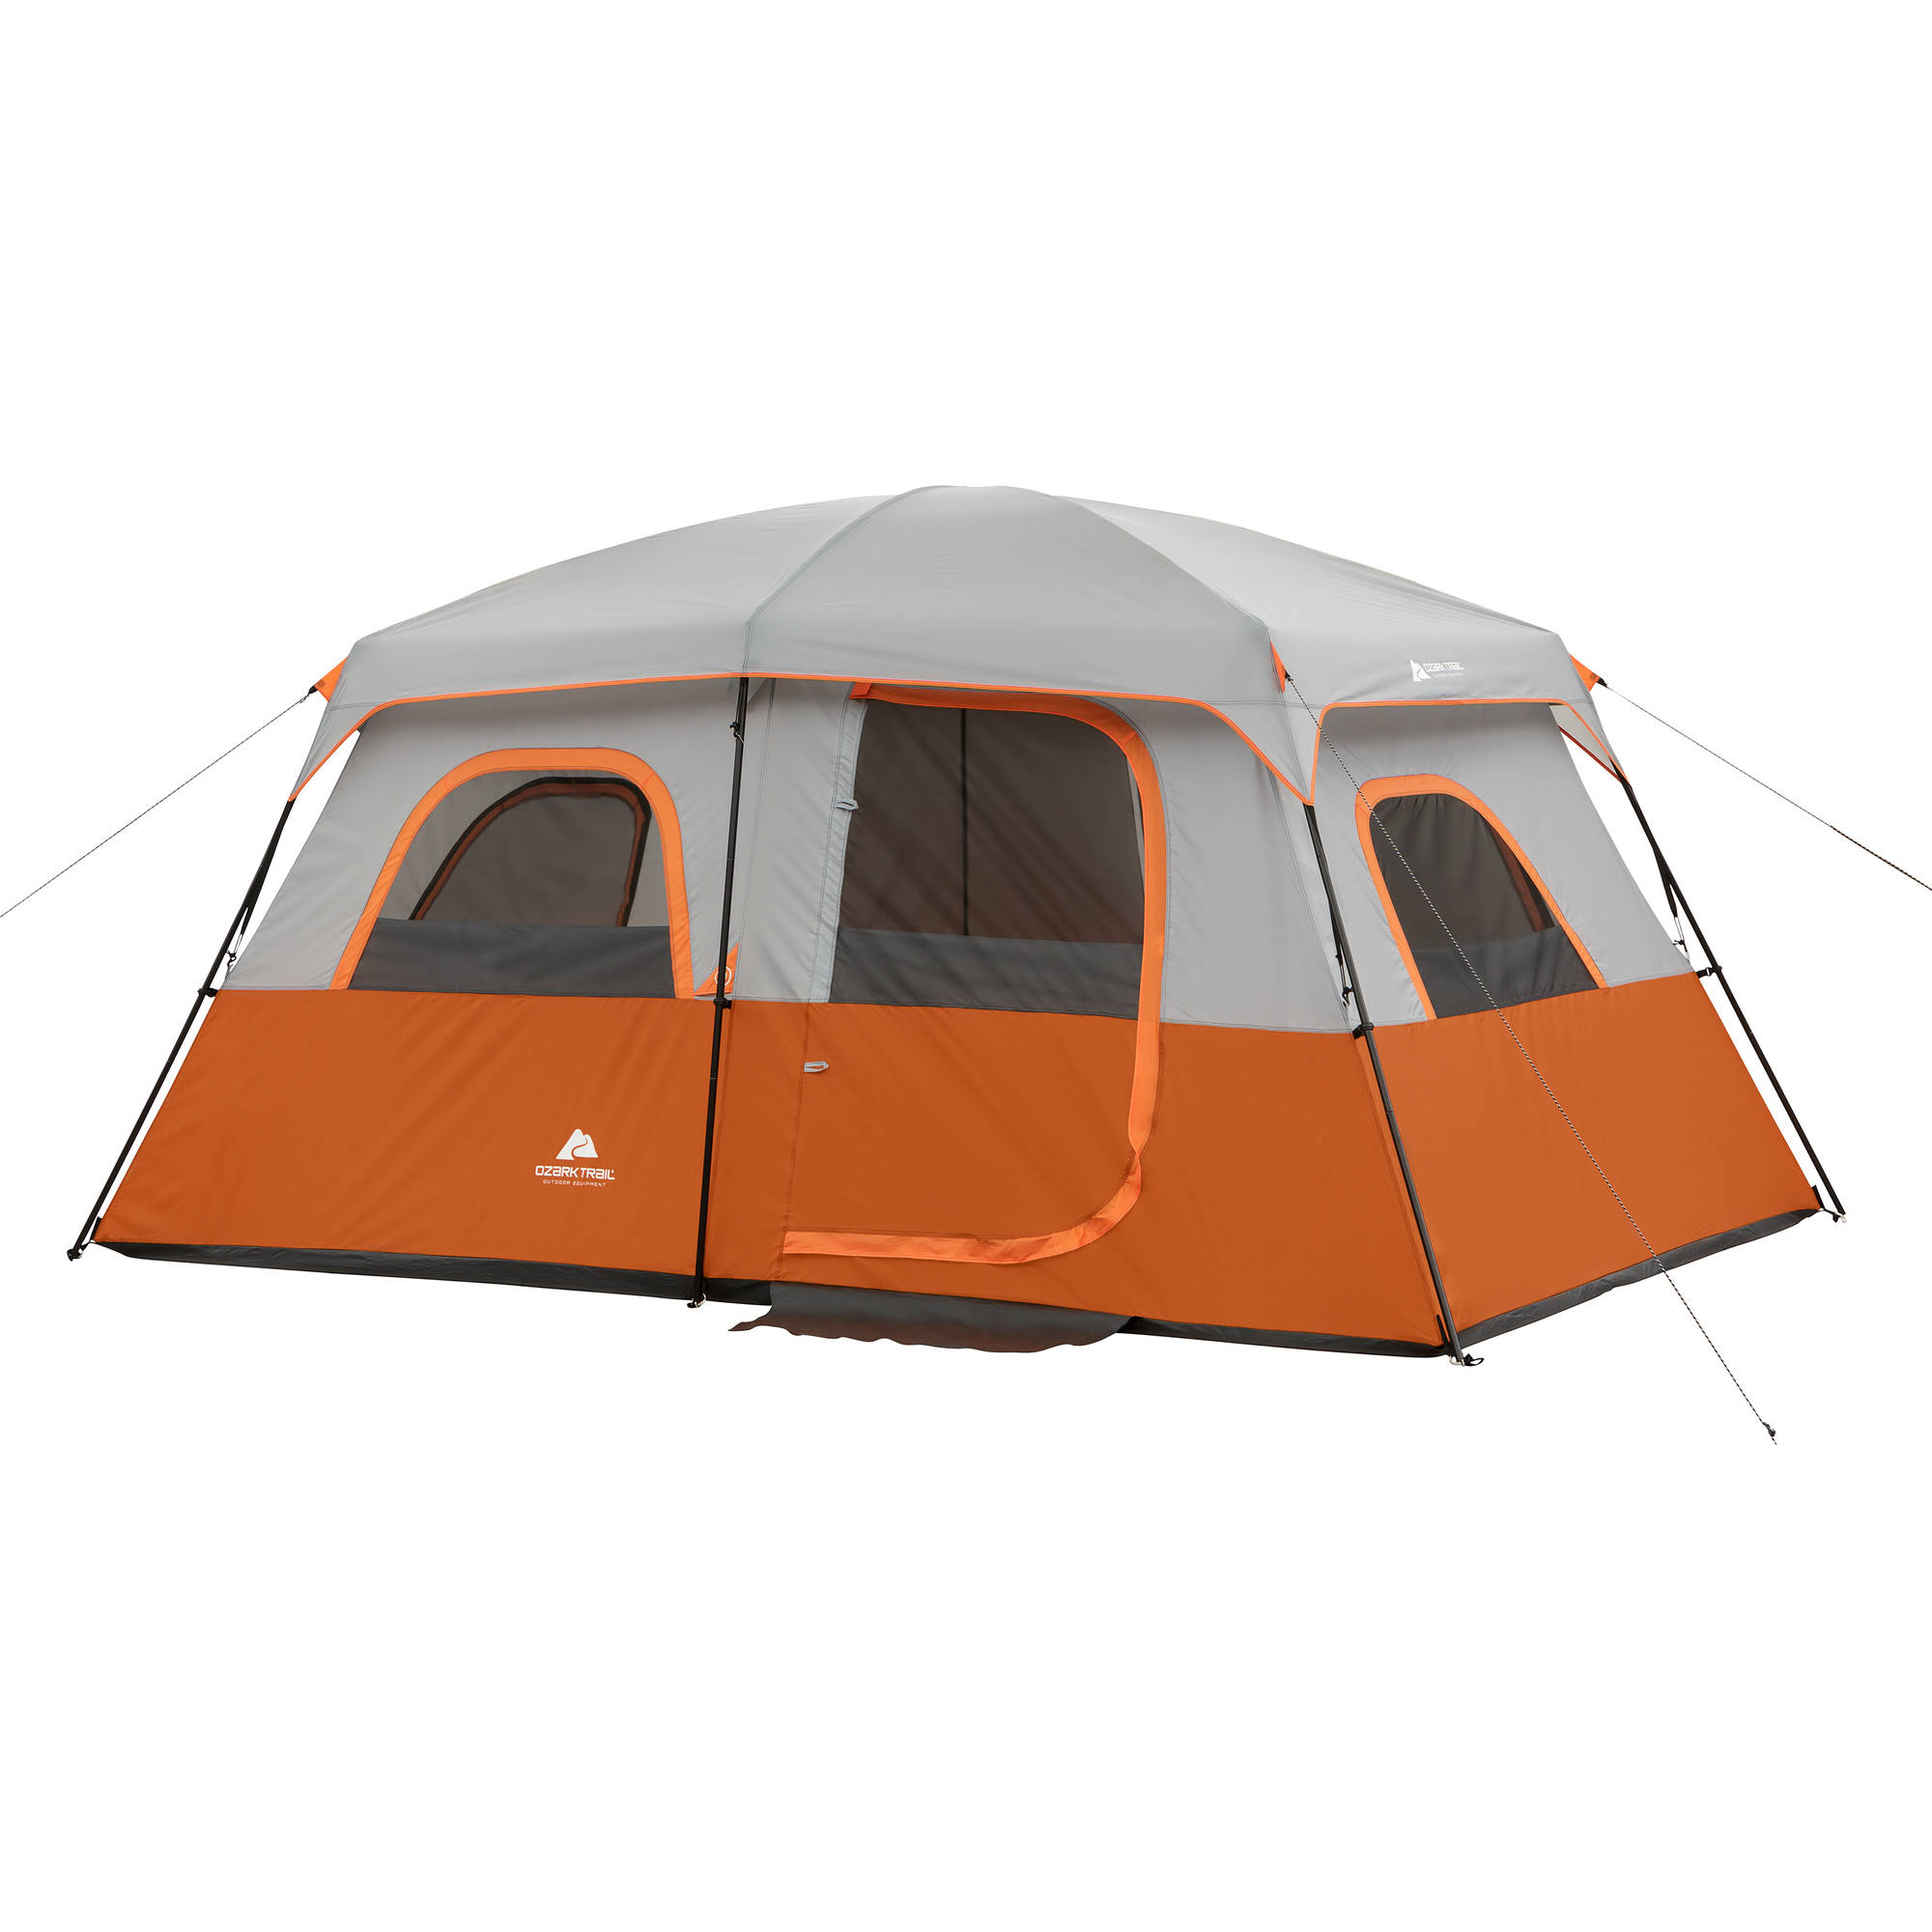 Ozark Trail 13' x 9' with 76"H Family Cabin Tent, Sleeps 8 - image 1 of 8